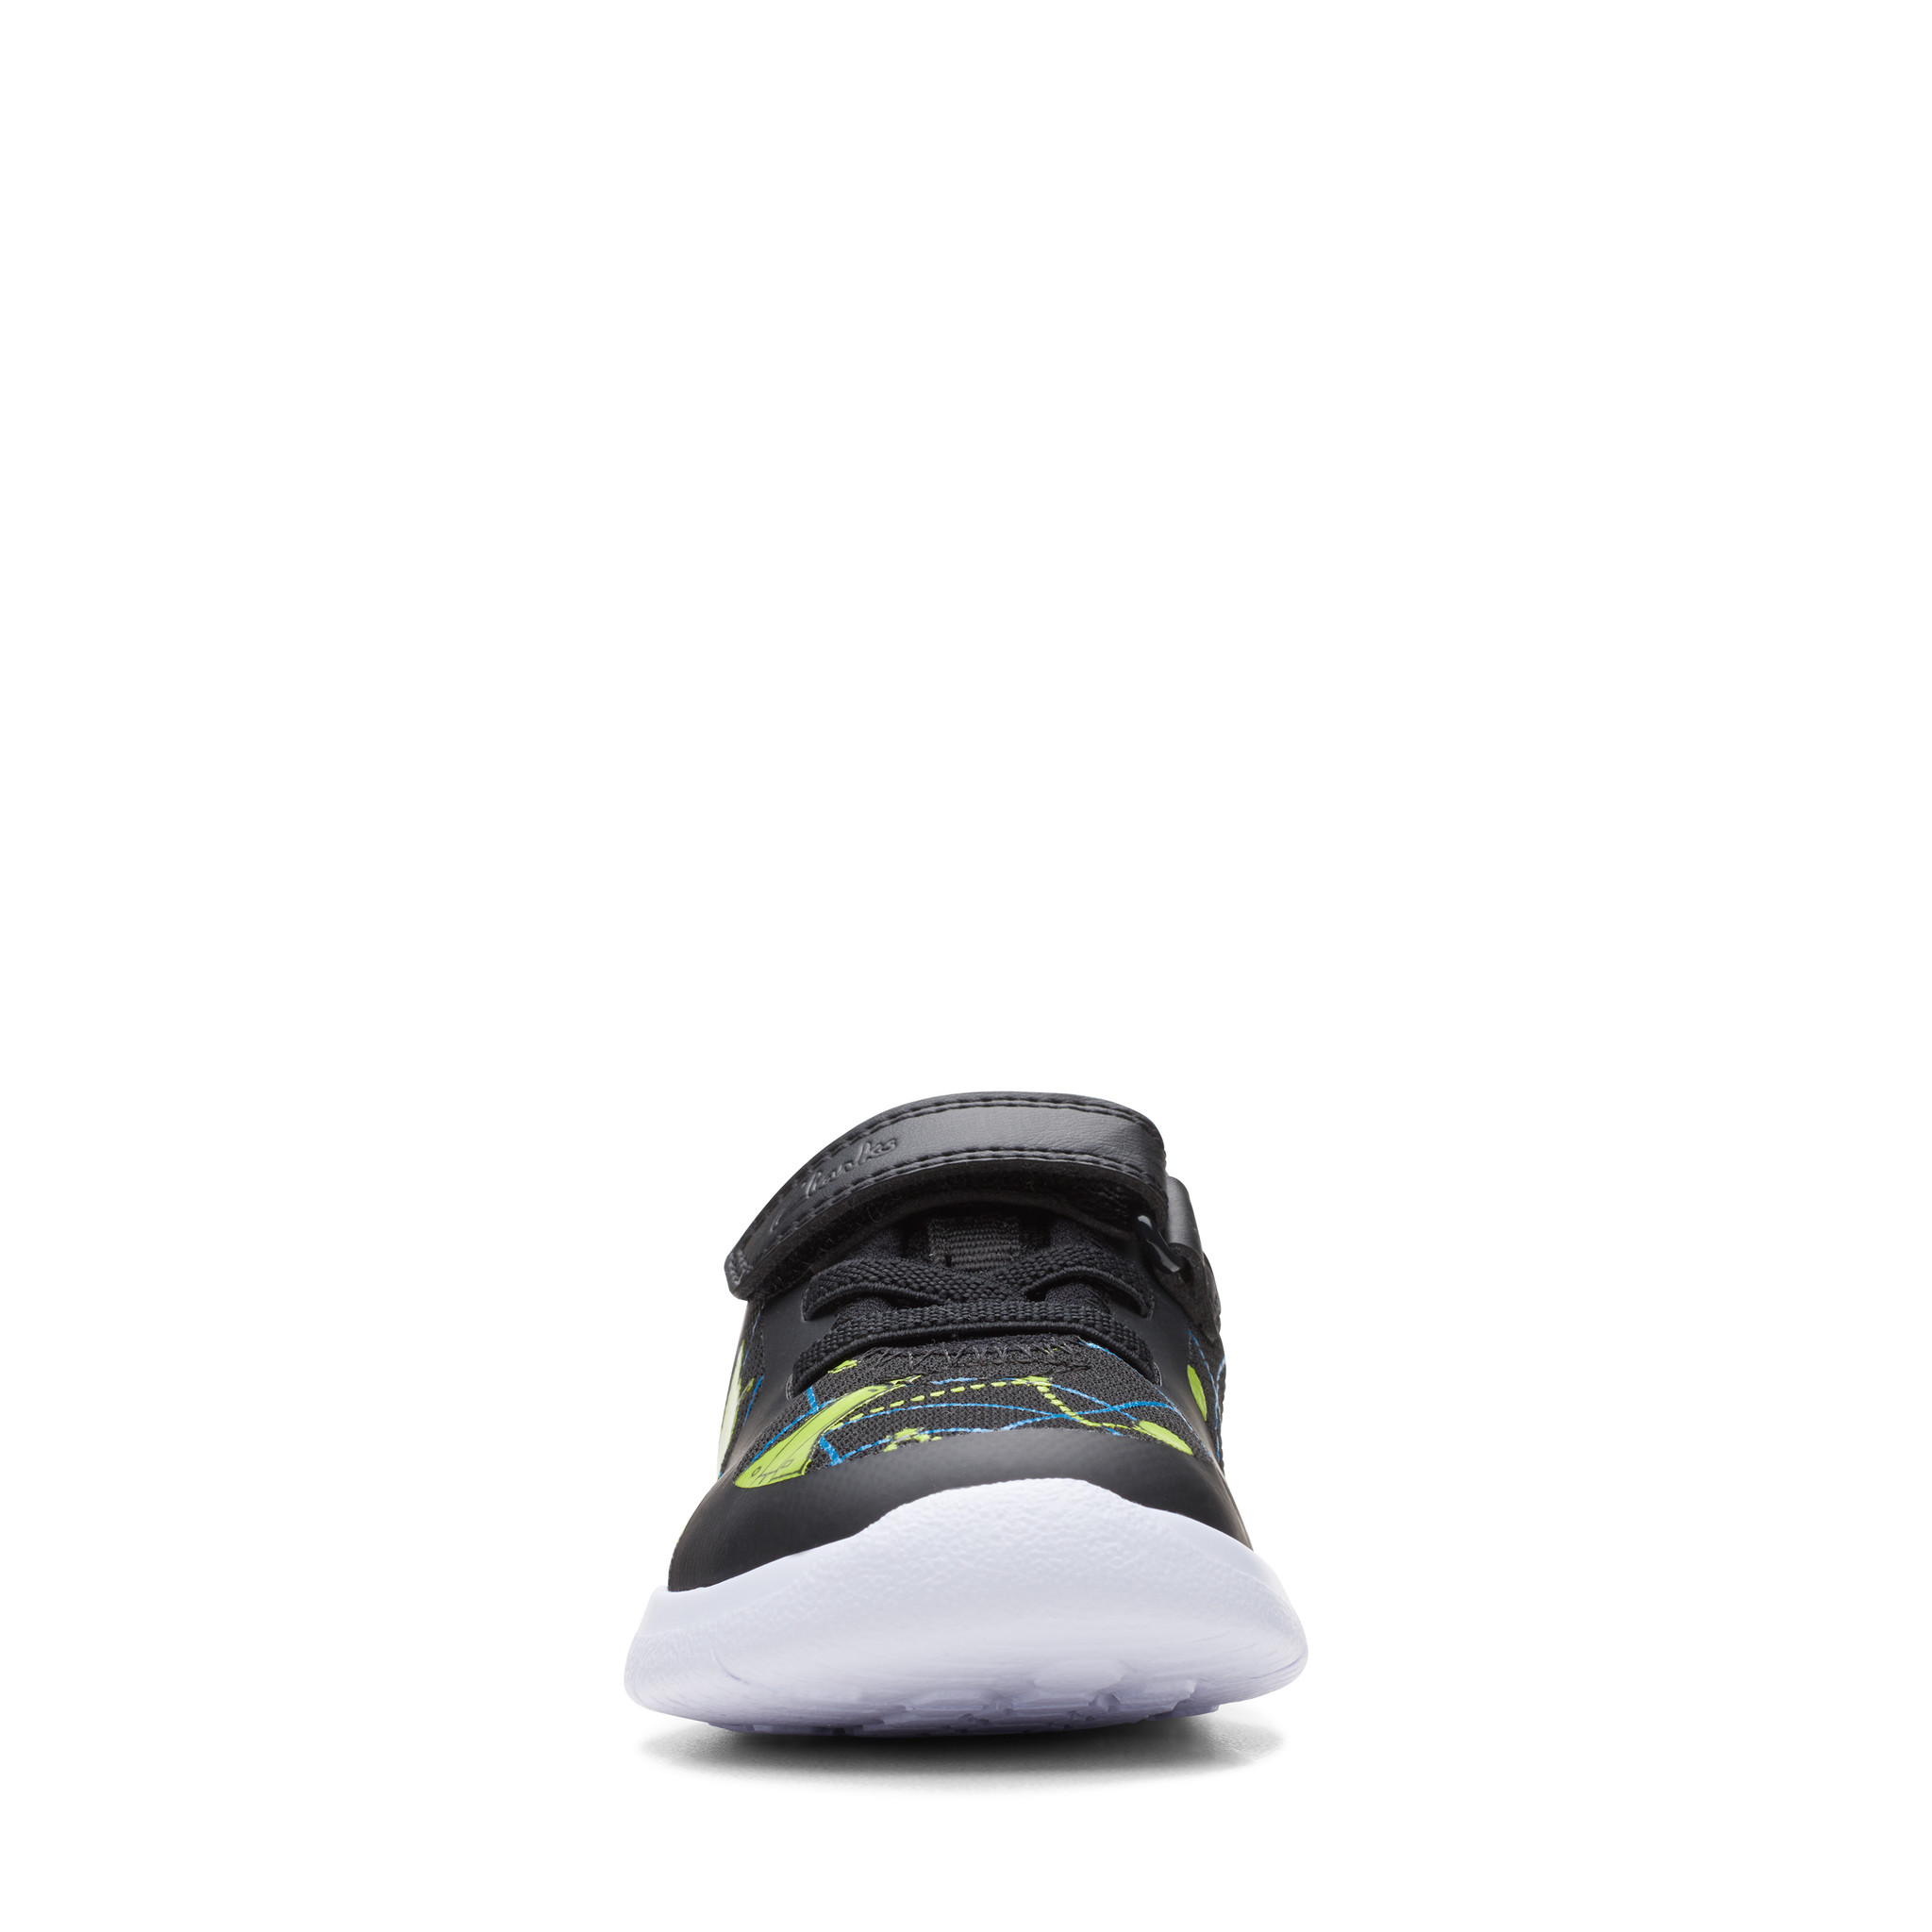 Clarks Ath Cosmo Black/Green